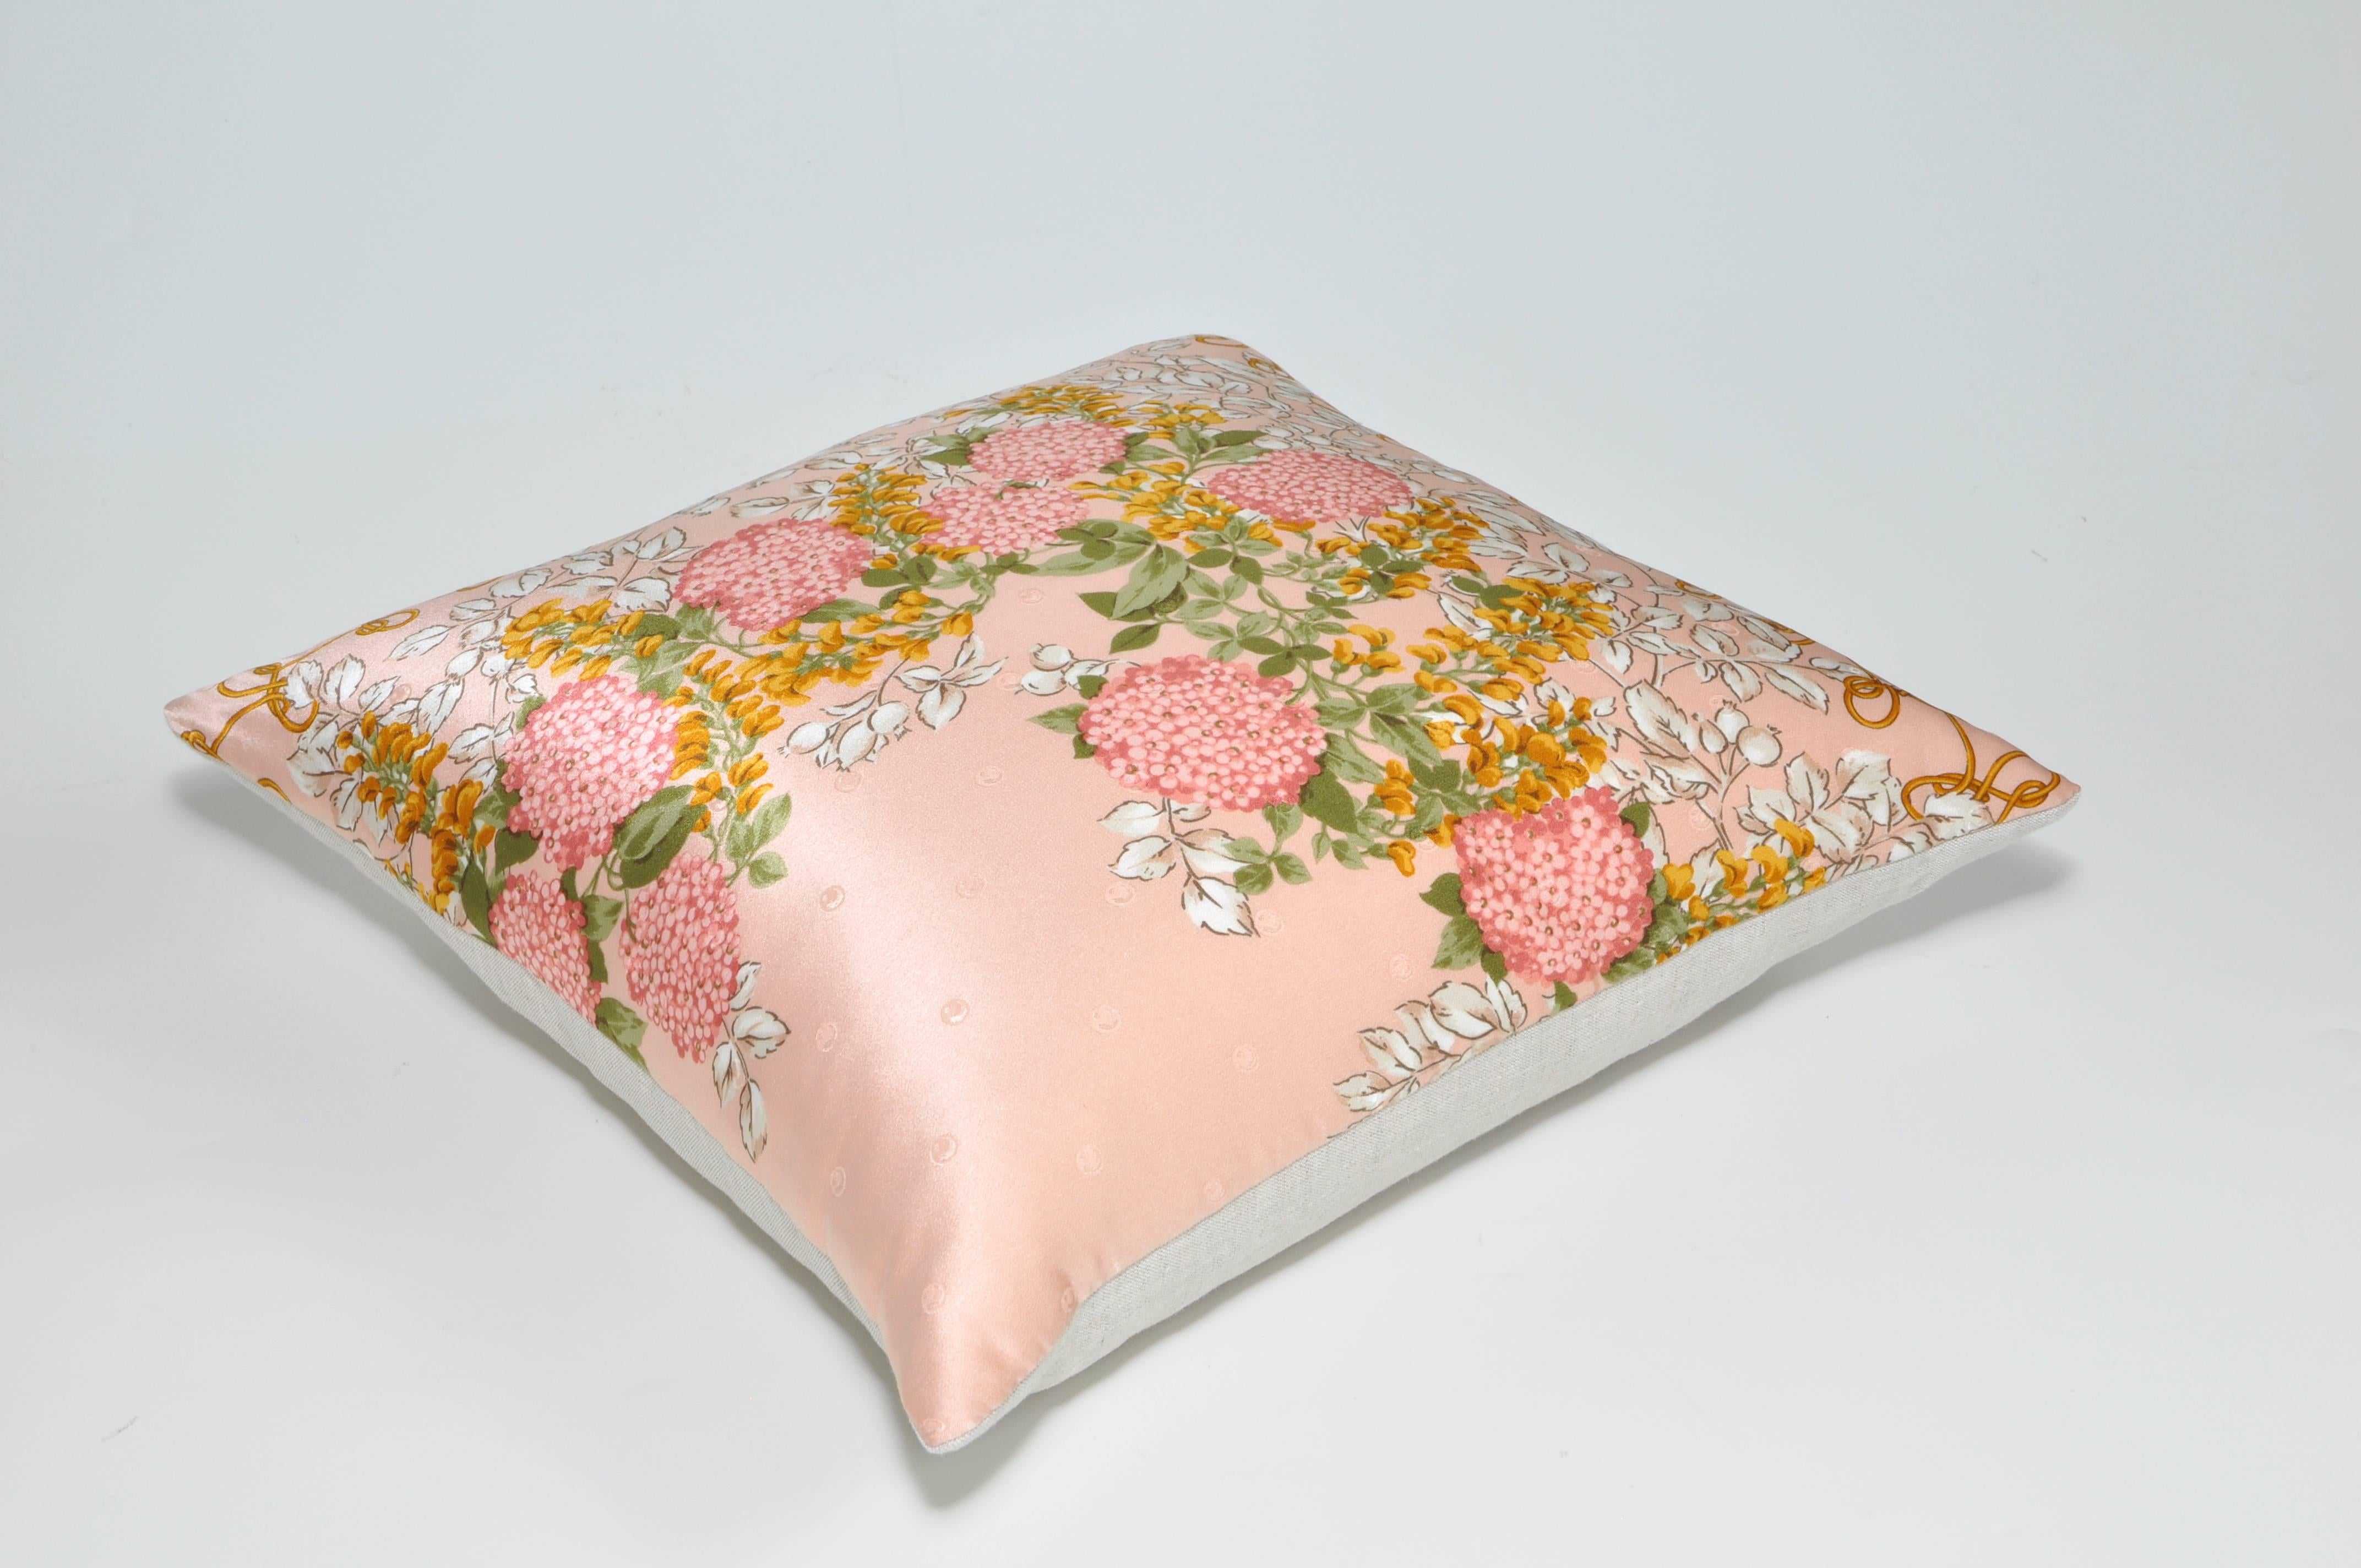 Vintage Nina Ricci Peach Silk Scarf with Irish Linen Cushion Pillow In Excellent Condition For Sale In Great Britain, Northern Ireland